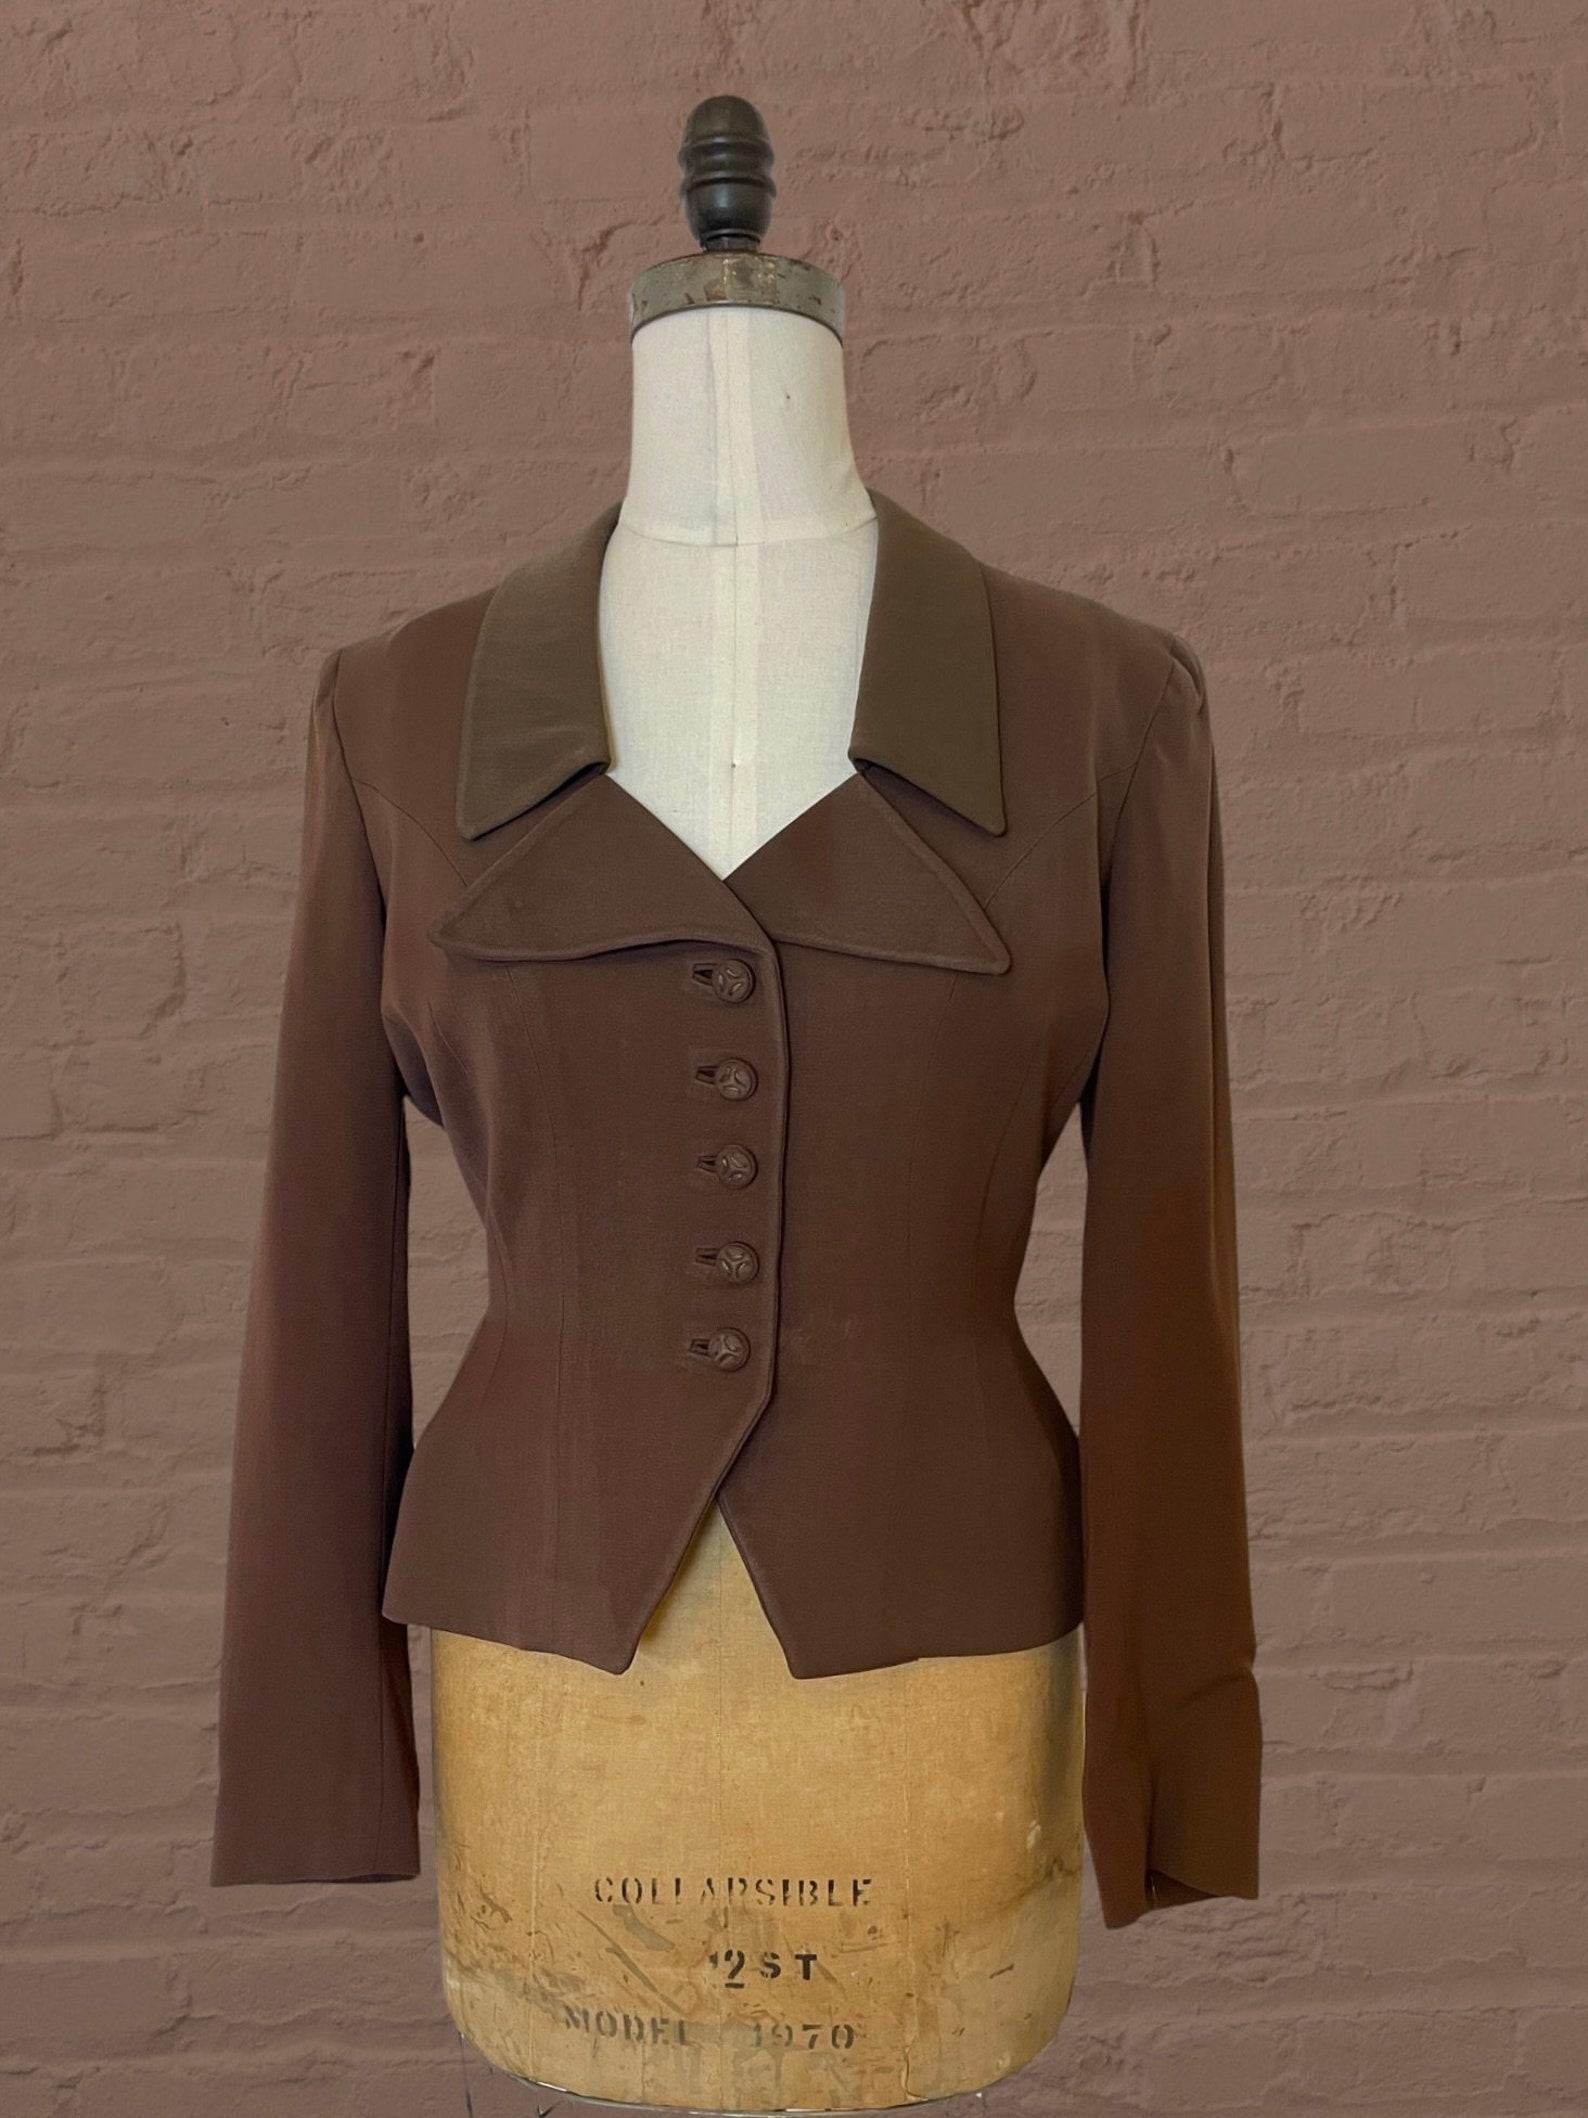 Vintage brown wool blazer. fashionable collar. cinched waist. long sleeves. brown & white striped lining. covered buttons. has shoulder pads. 

A beautifully constructed jacket.

A wonderful piece of mid century fashion history! Make a statement in